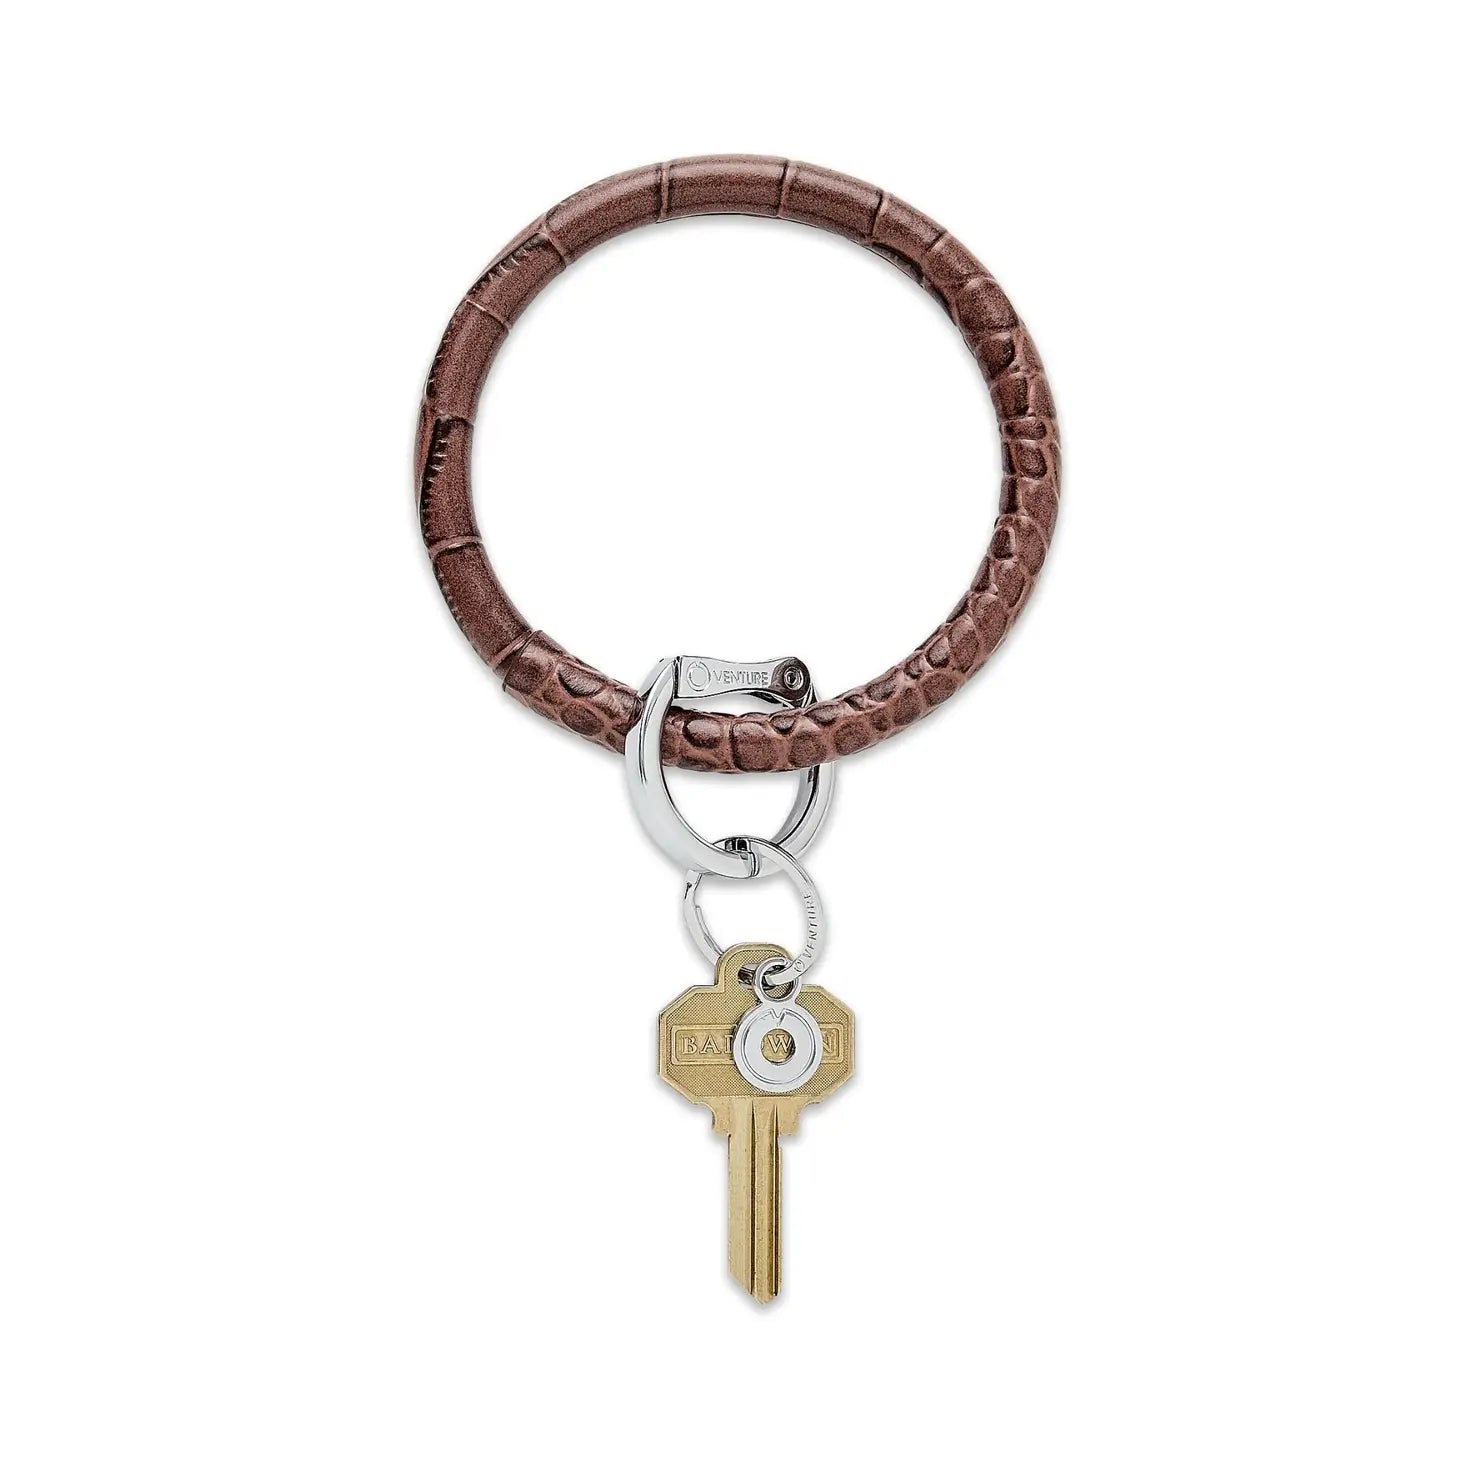 Oventure Big O Leather Key Ring - Cherry on Top Croc